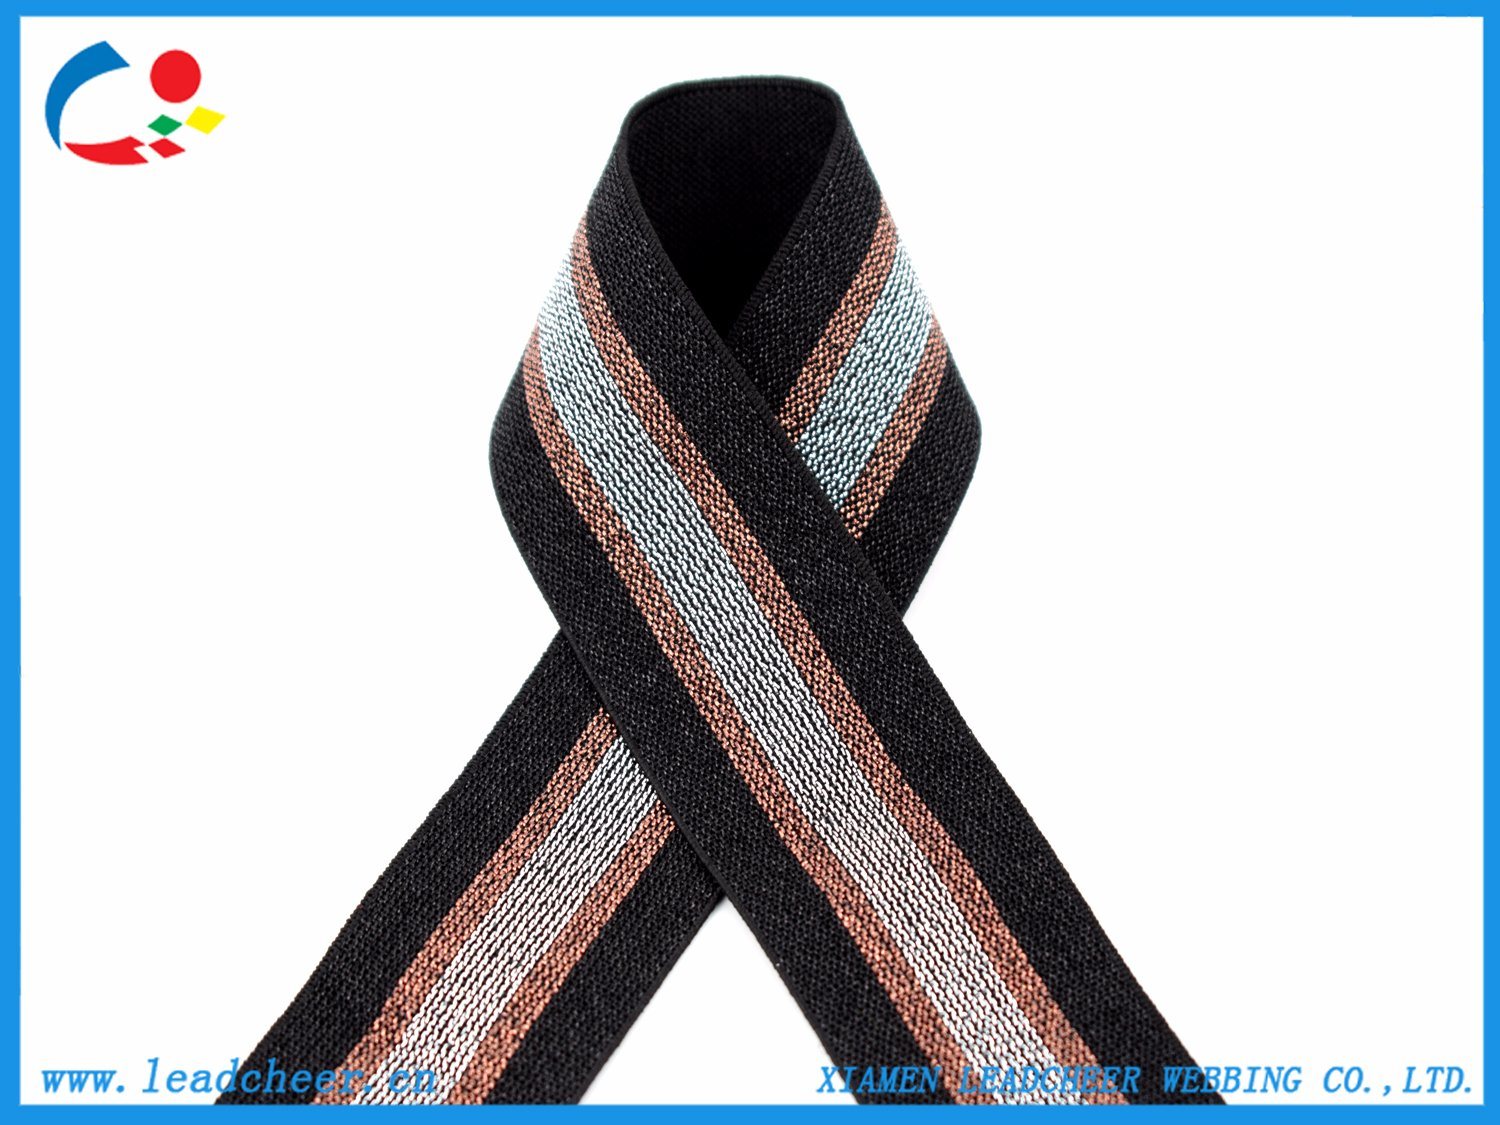 Colorful Elastic Ribbon for Women Lingerie or Underwear